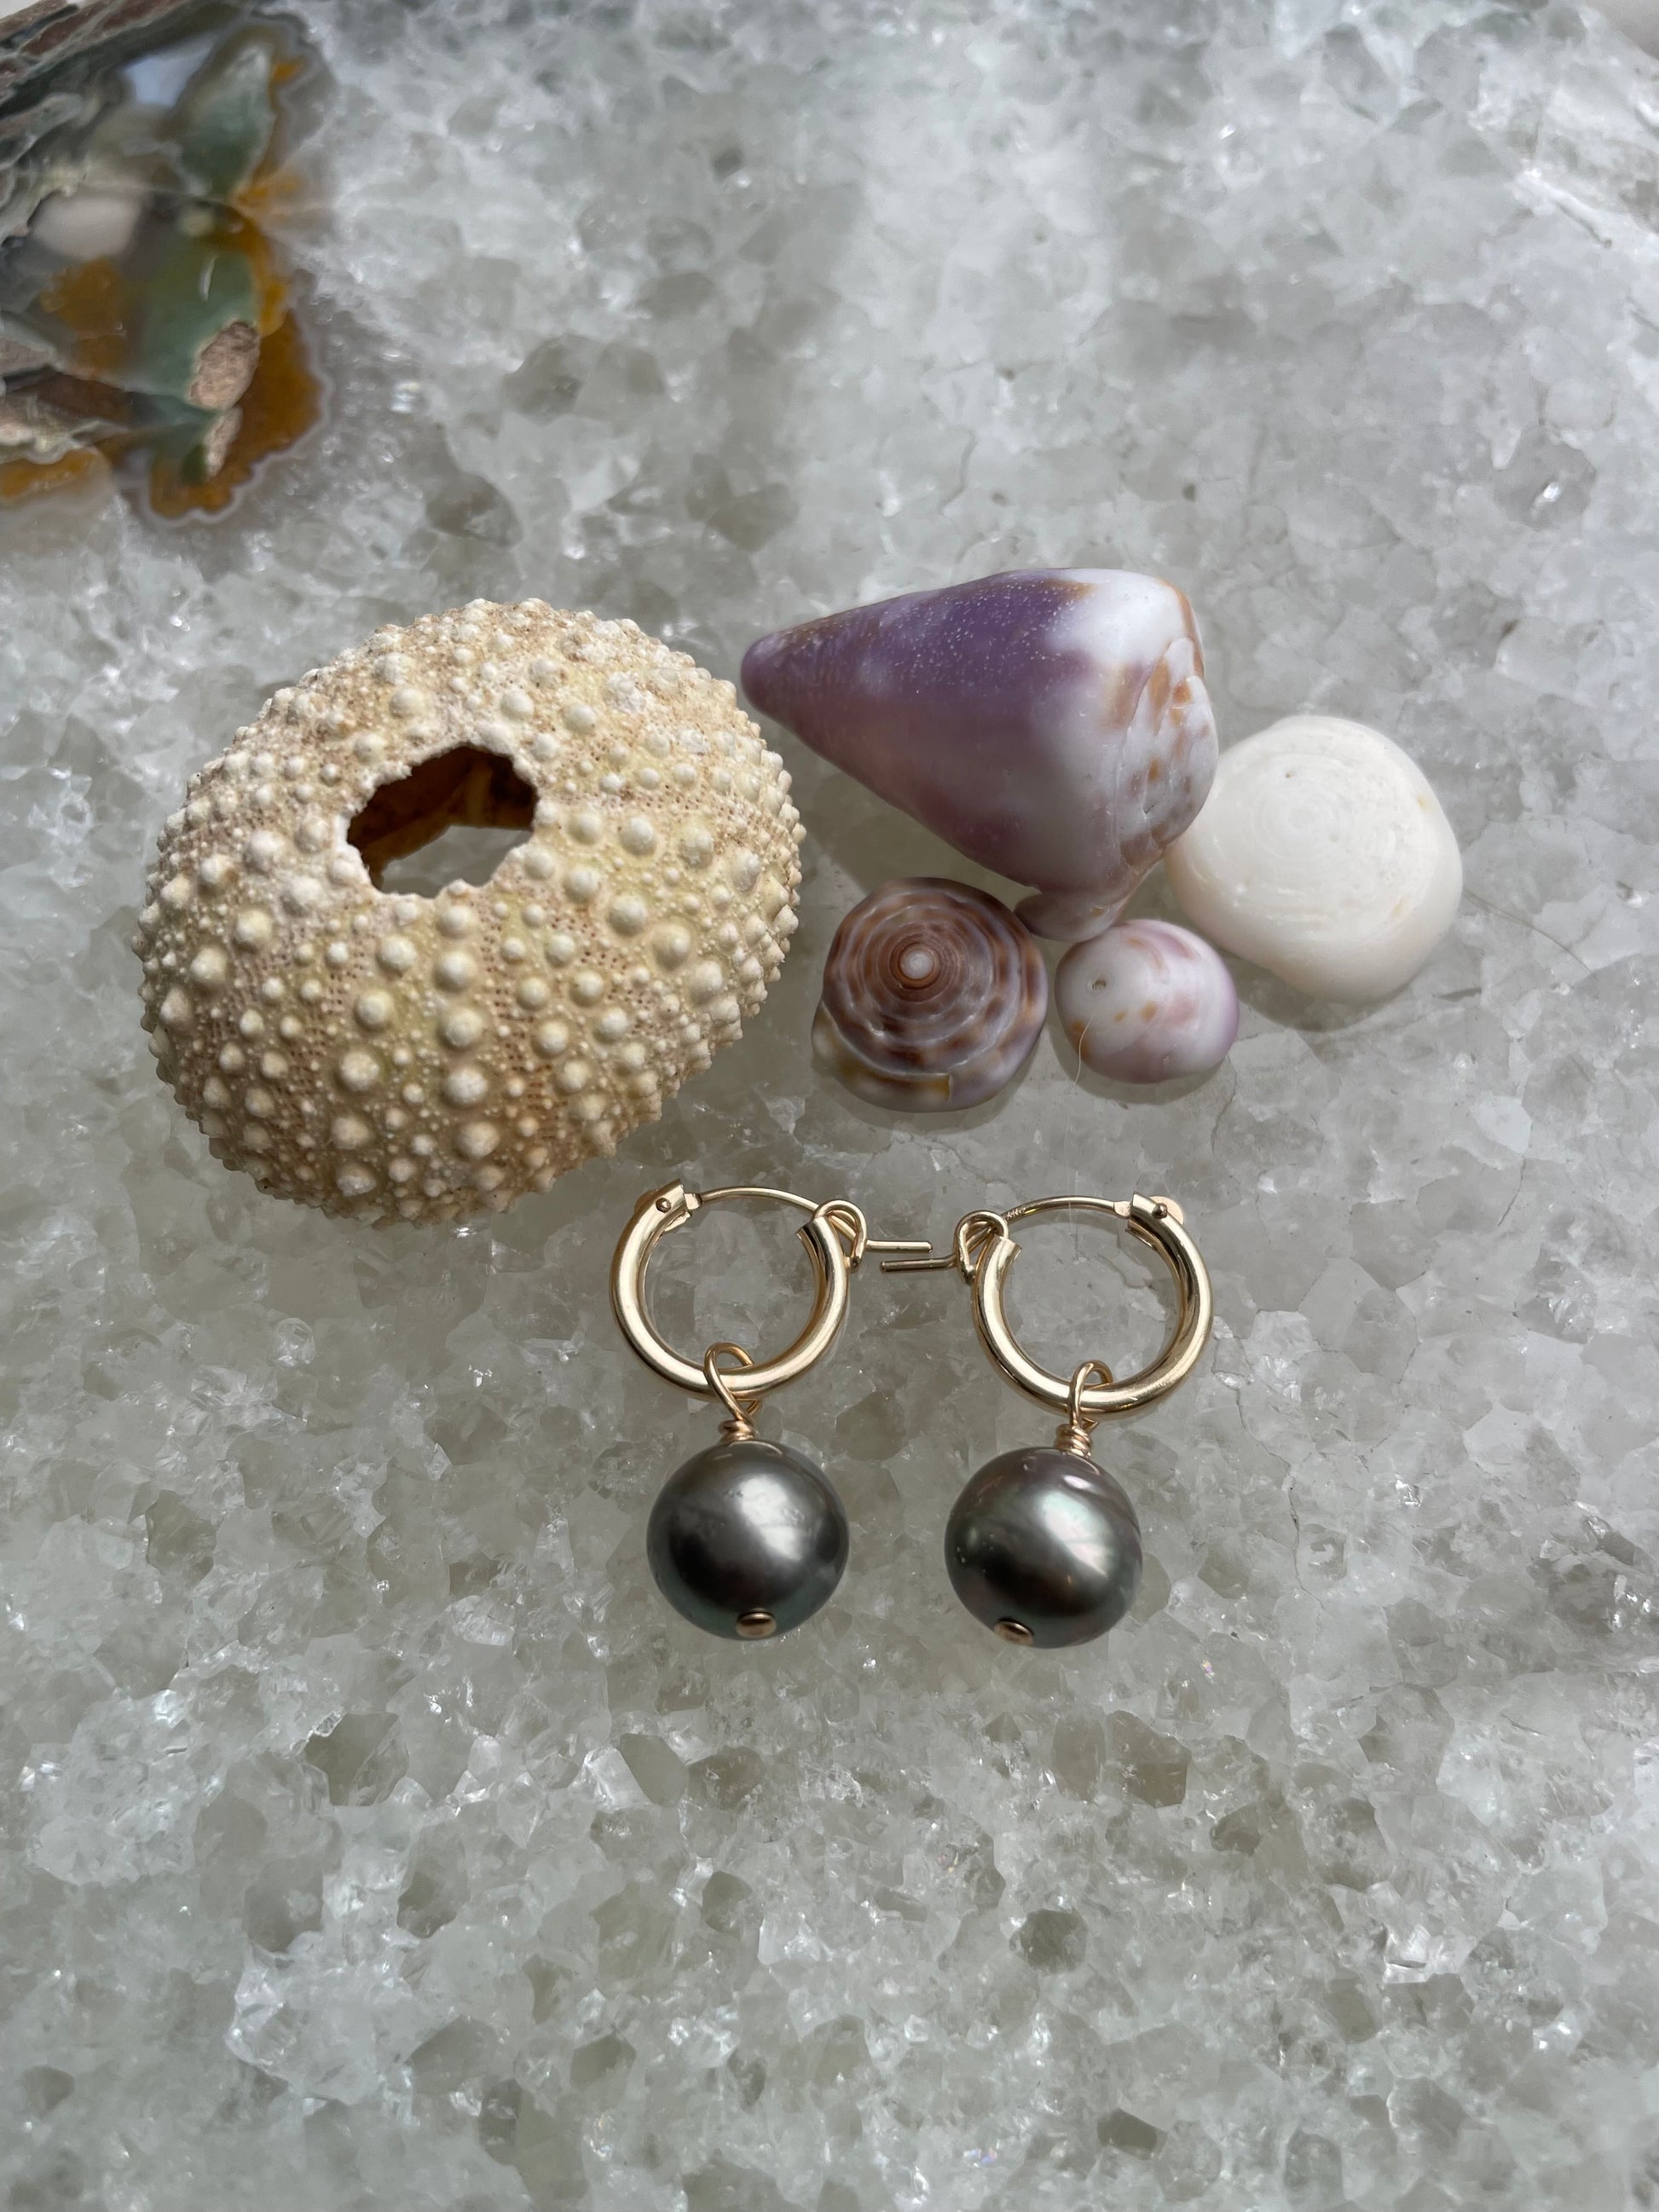 a pair of huggie golden hoops with a single balck pearl sit on quartz with some shells in the backdrop